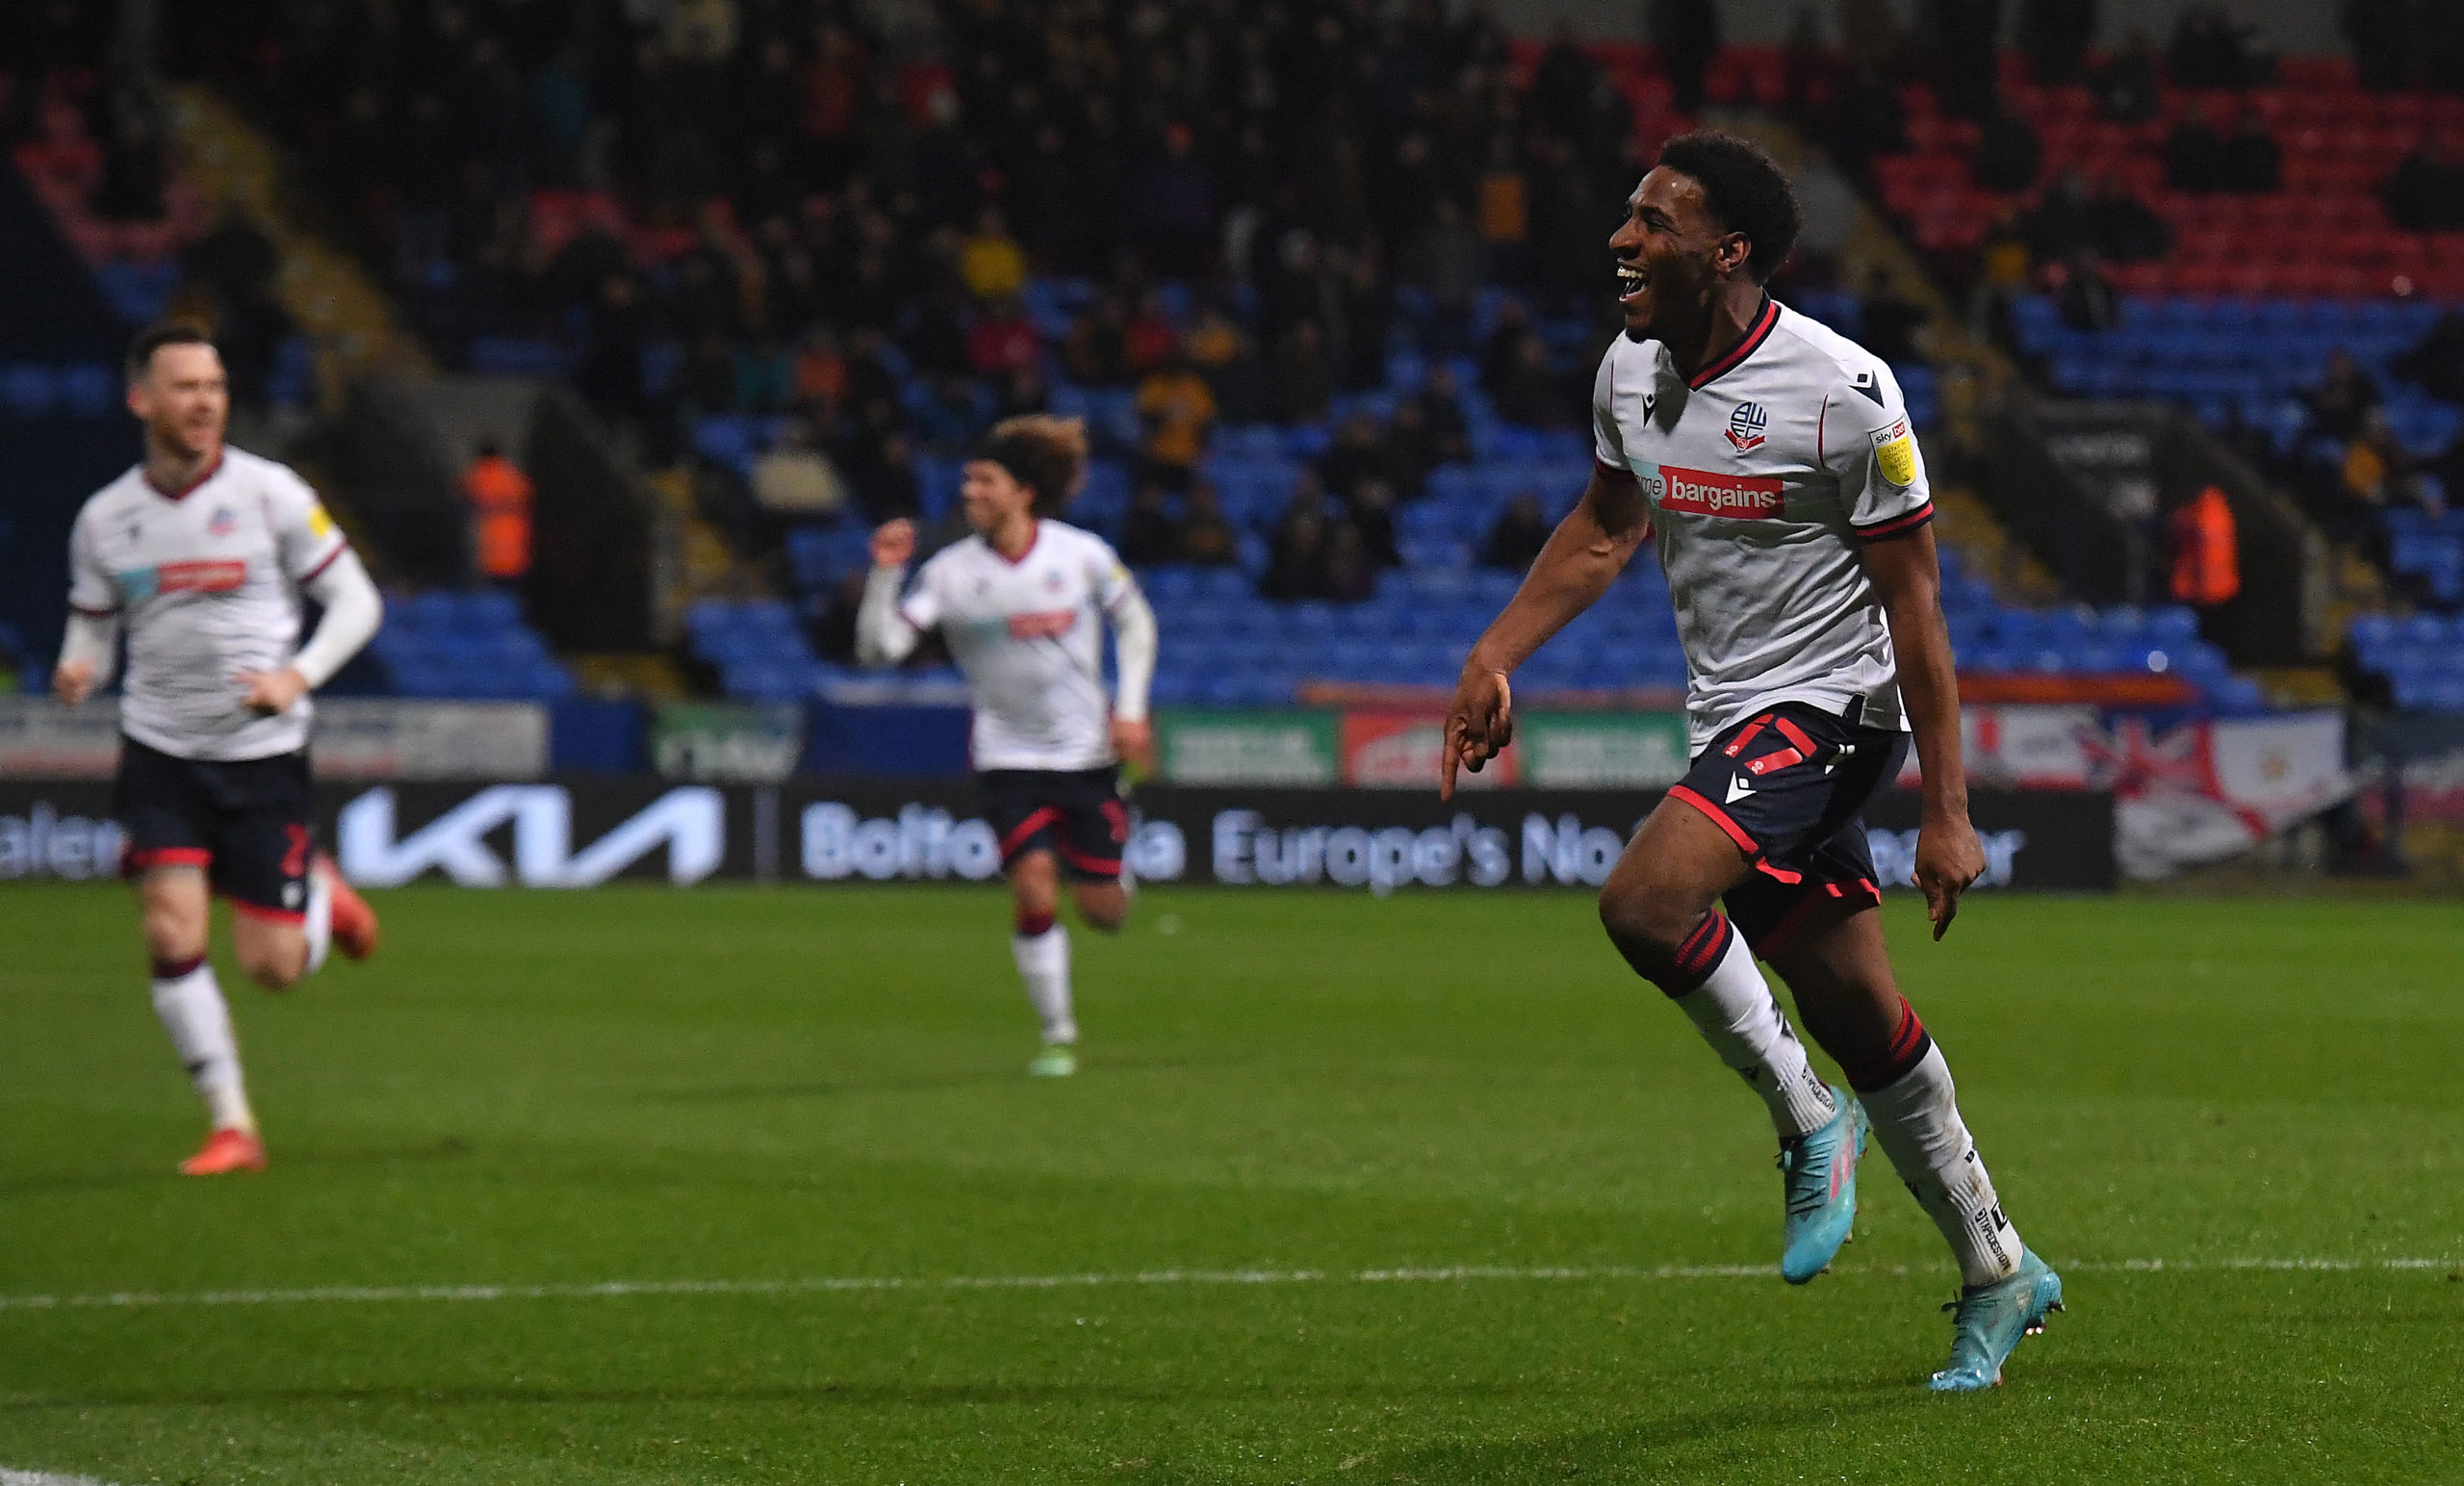 Oladapo Afolayan left West Ham to join Bolton in the summer